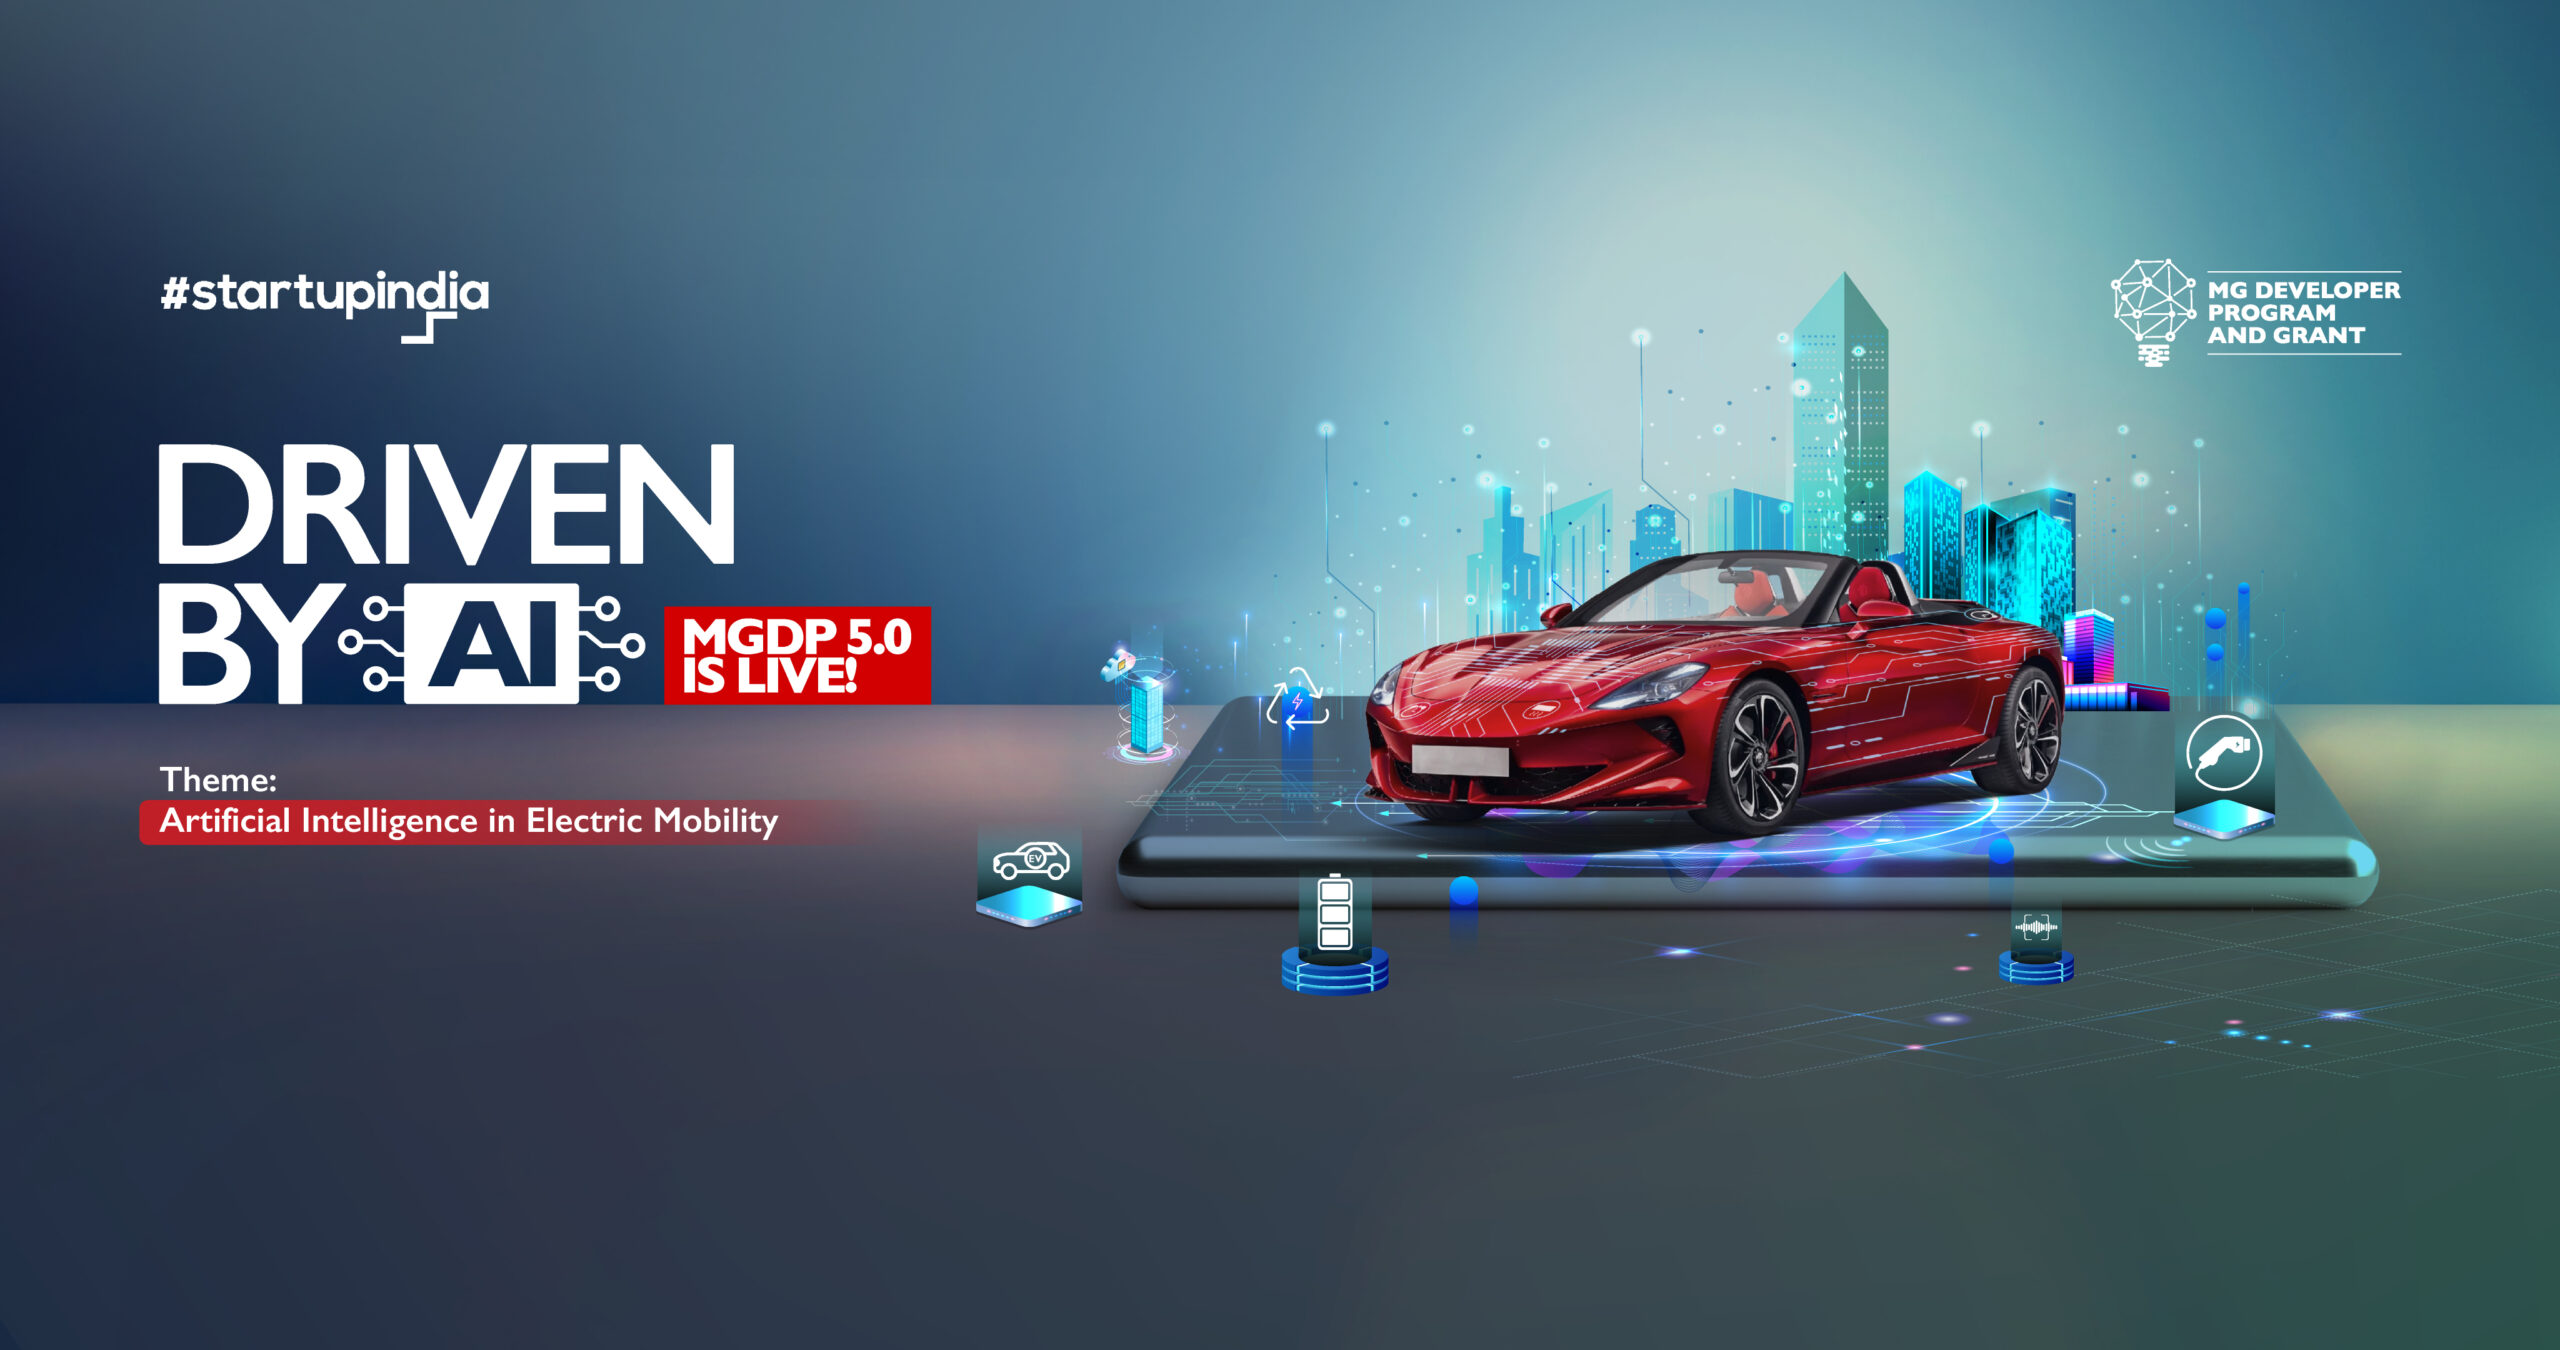 MG Motor India Launches AI-Focused Electric Mobility Initiative with Startup India and Manthan